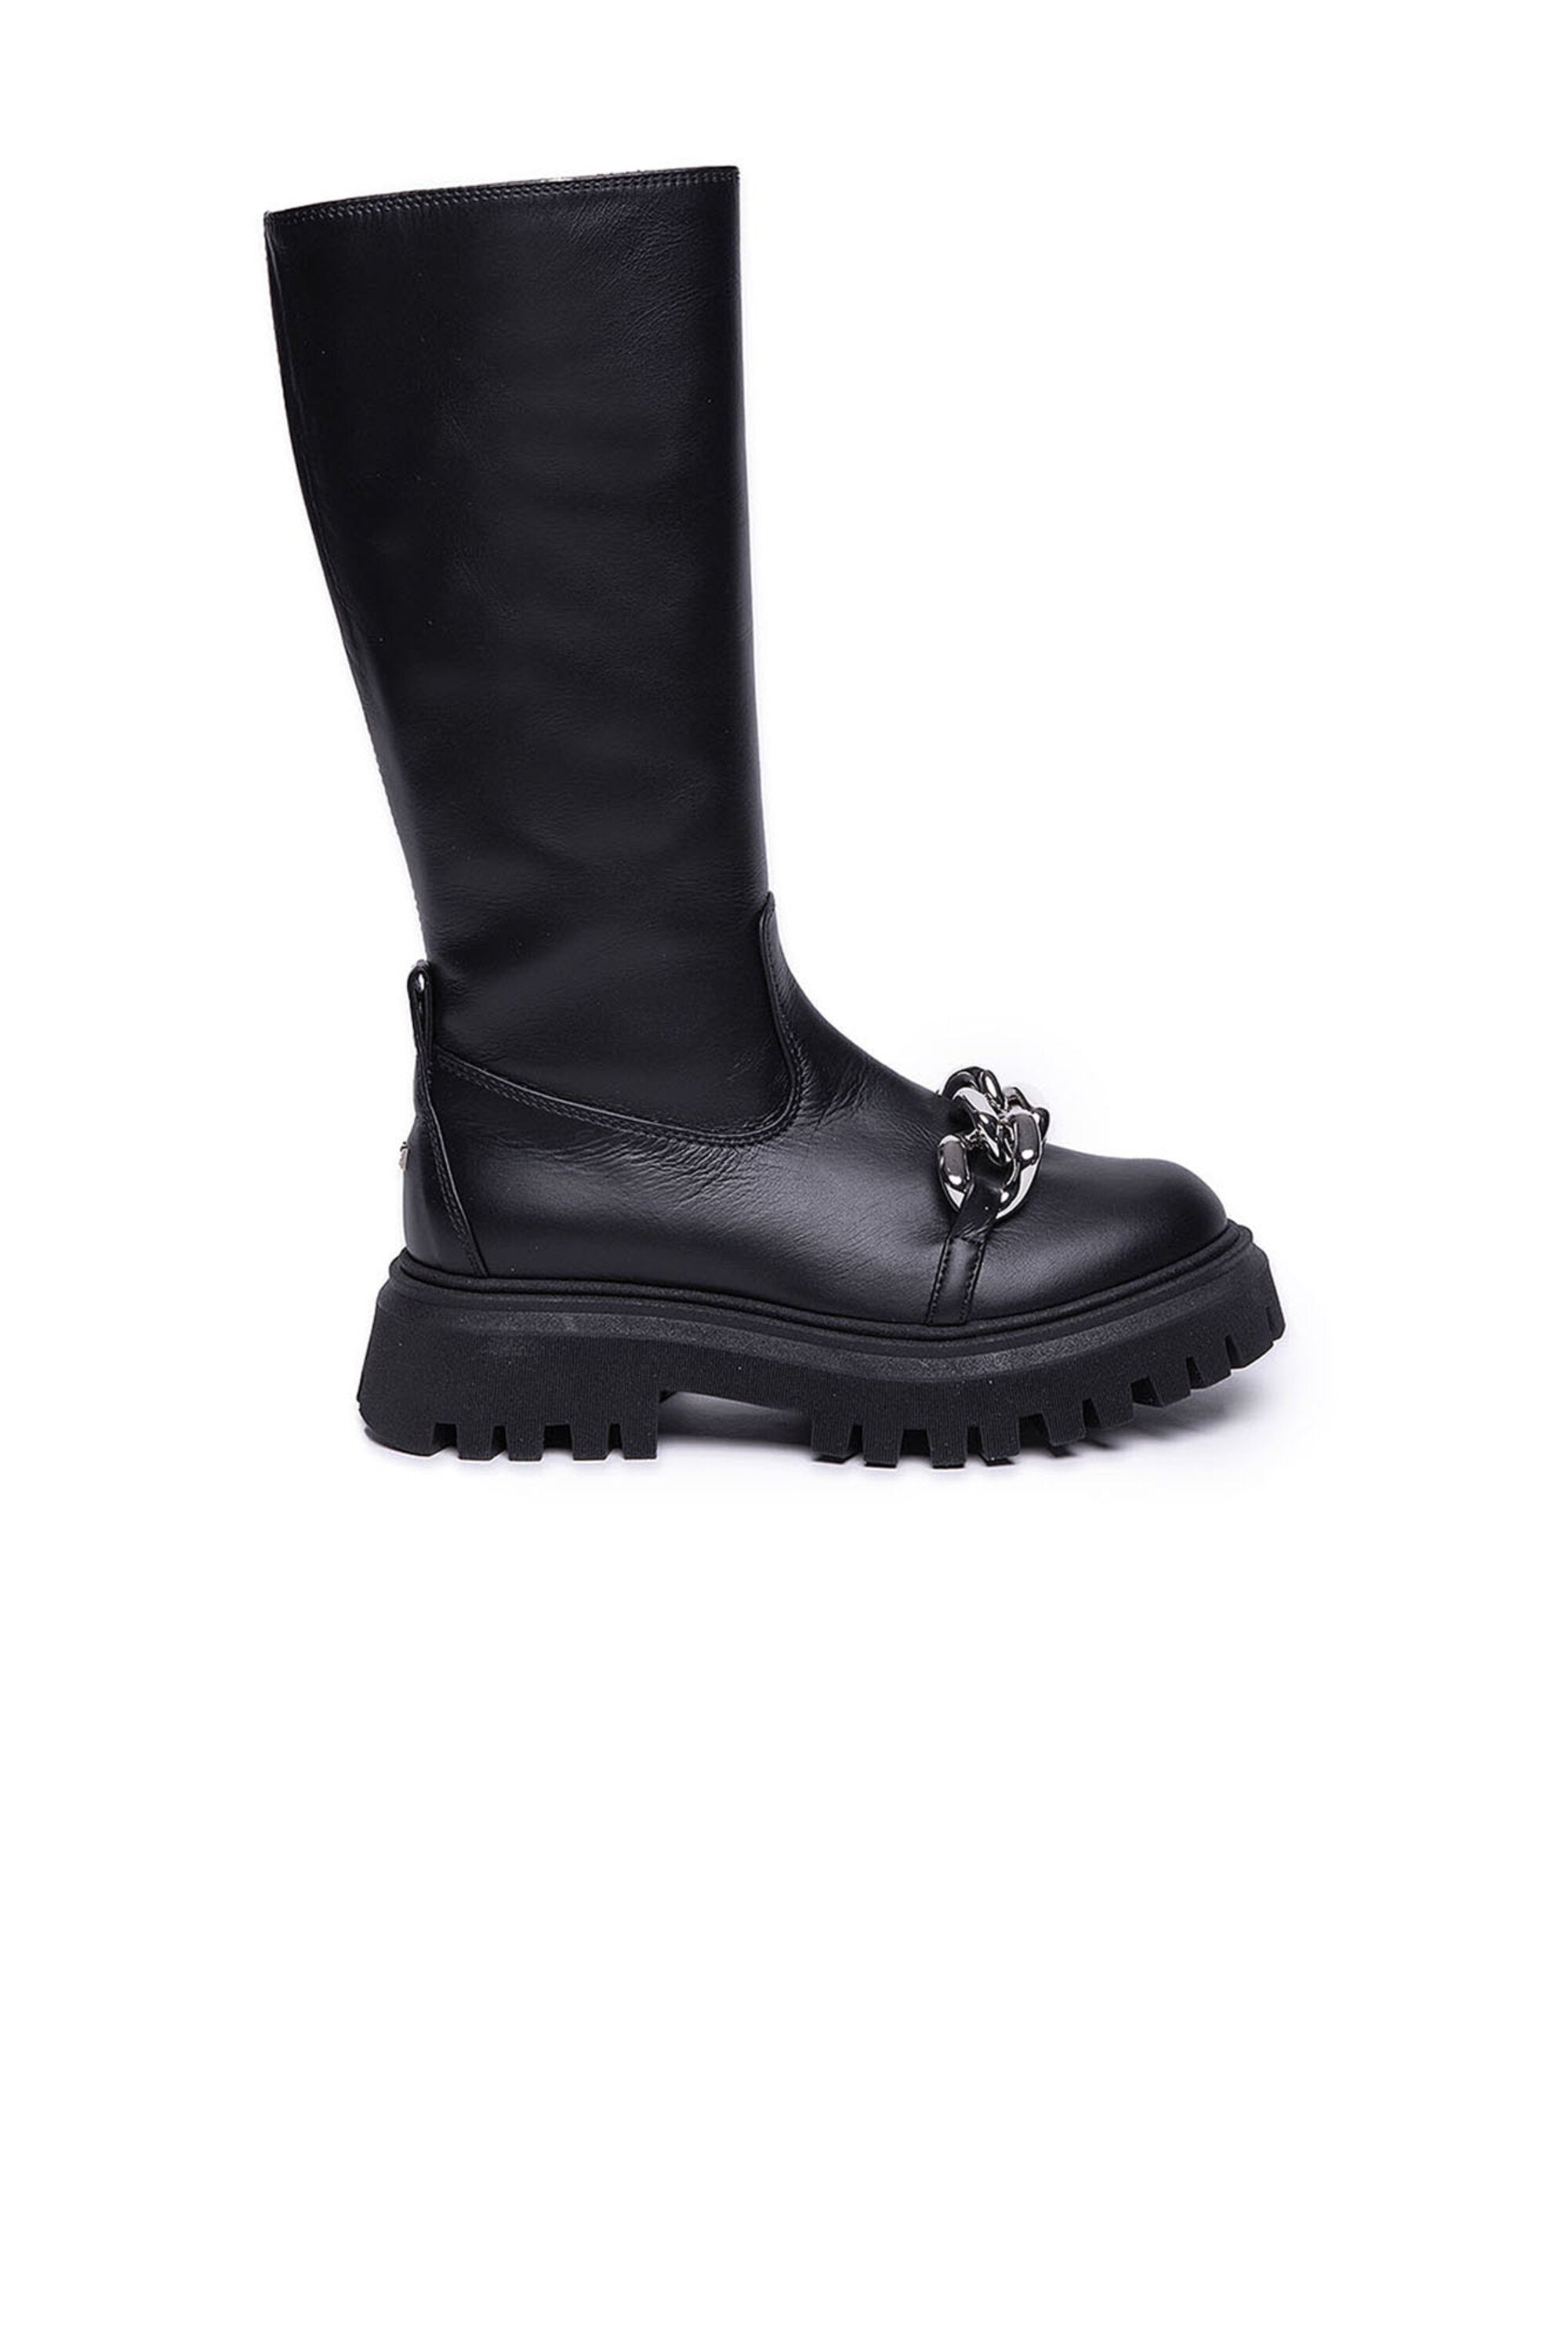 Black boots with chain